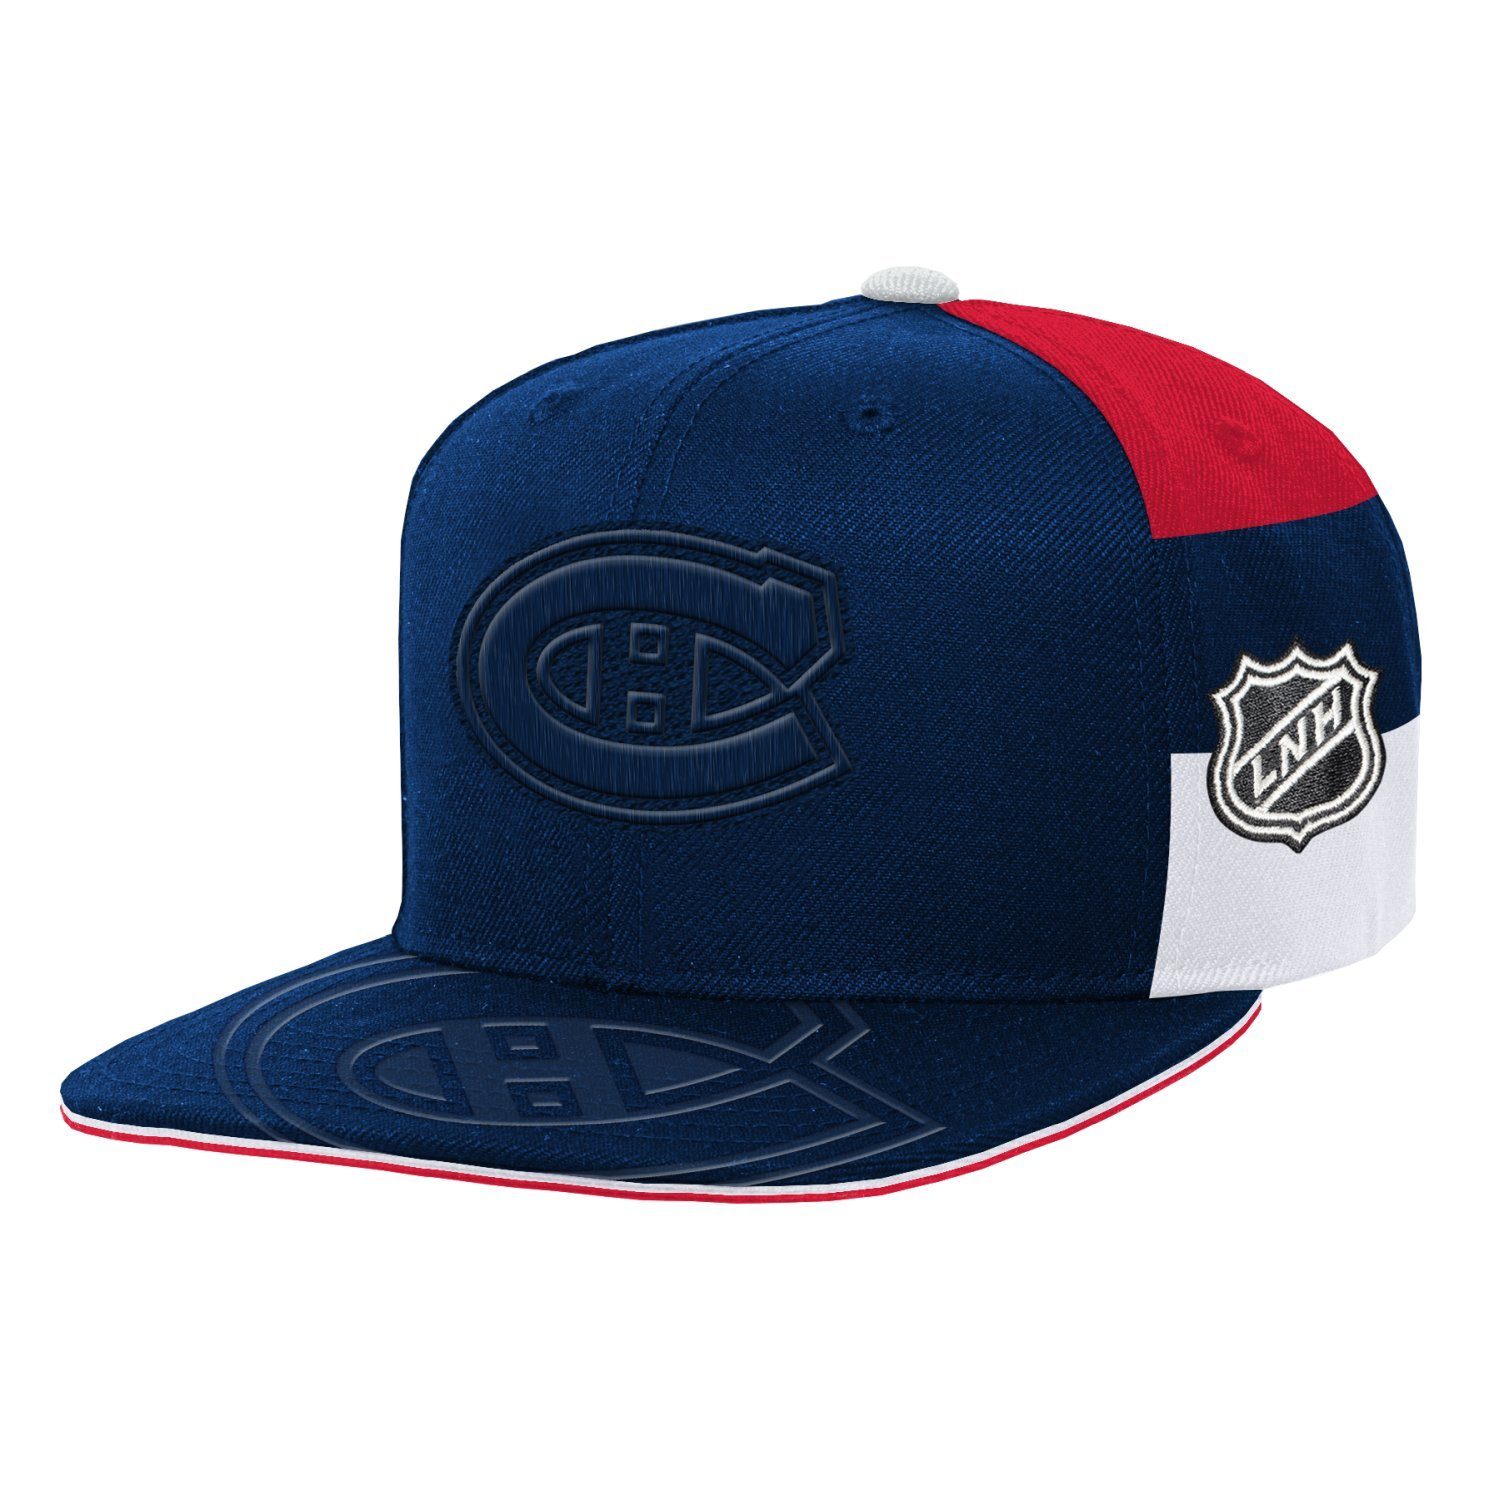 Outerstuff Baseball Cap Outerstuff FACEOFF Montreal Canadiens